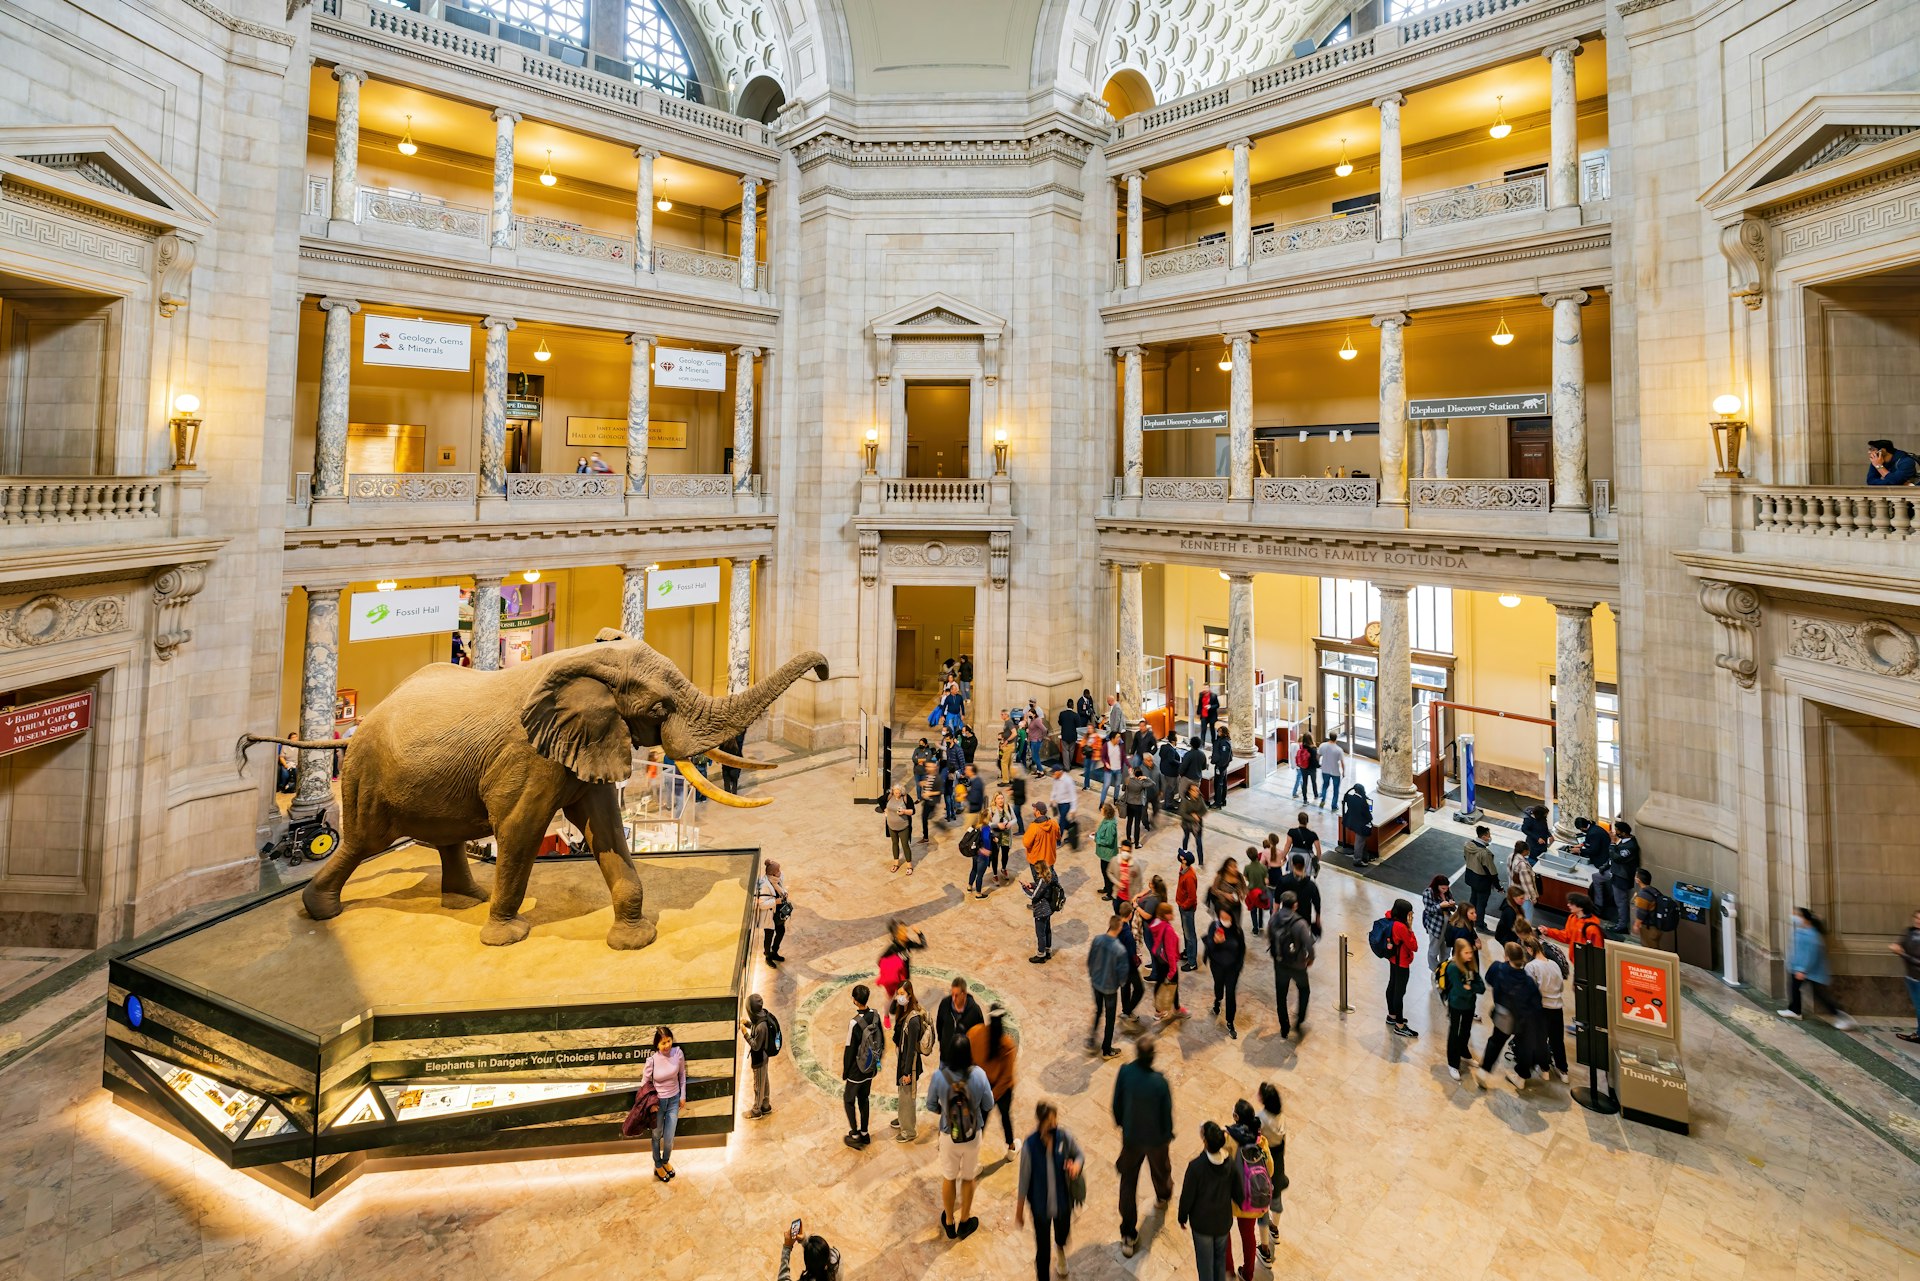 People walk around the mammoth statue in the main atrium of the Natural History Museum in DC